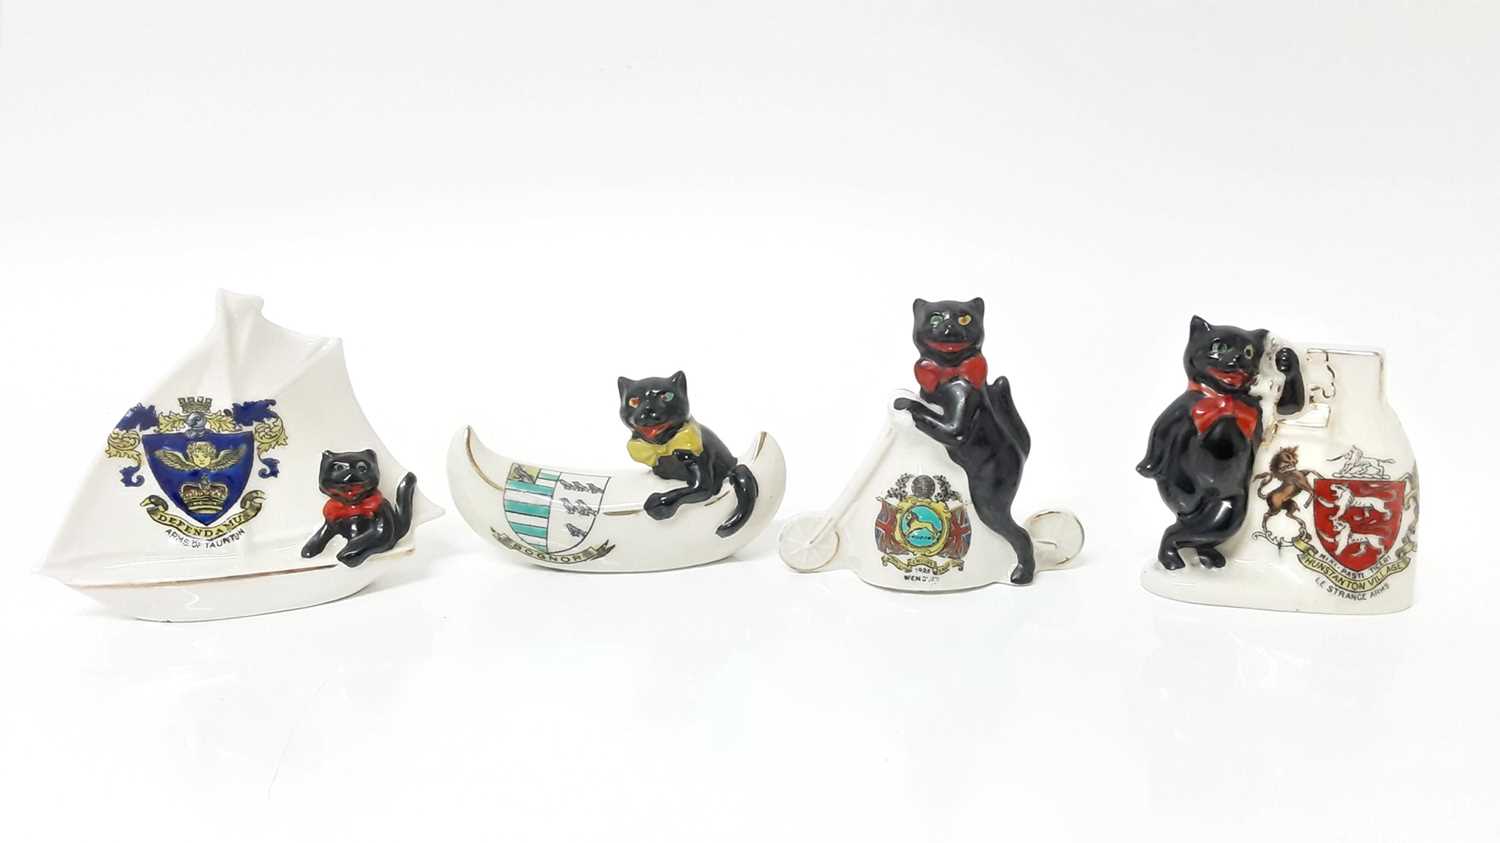 Lot 142 - Four Arcadian Crested China Black Cats - Wembley 1925, Arms of Taunton, Hunstanton Village and Bognor